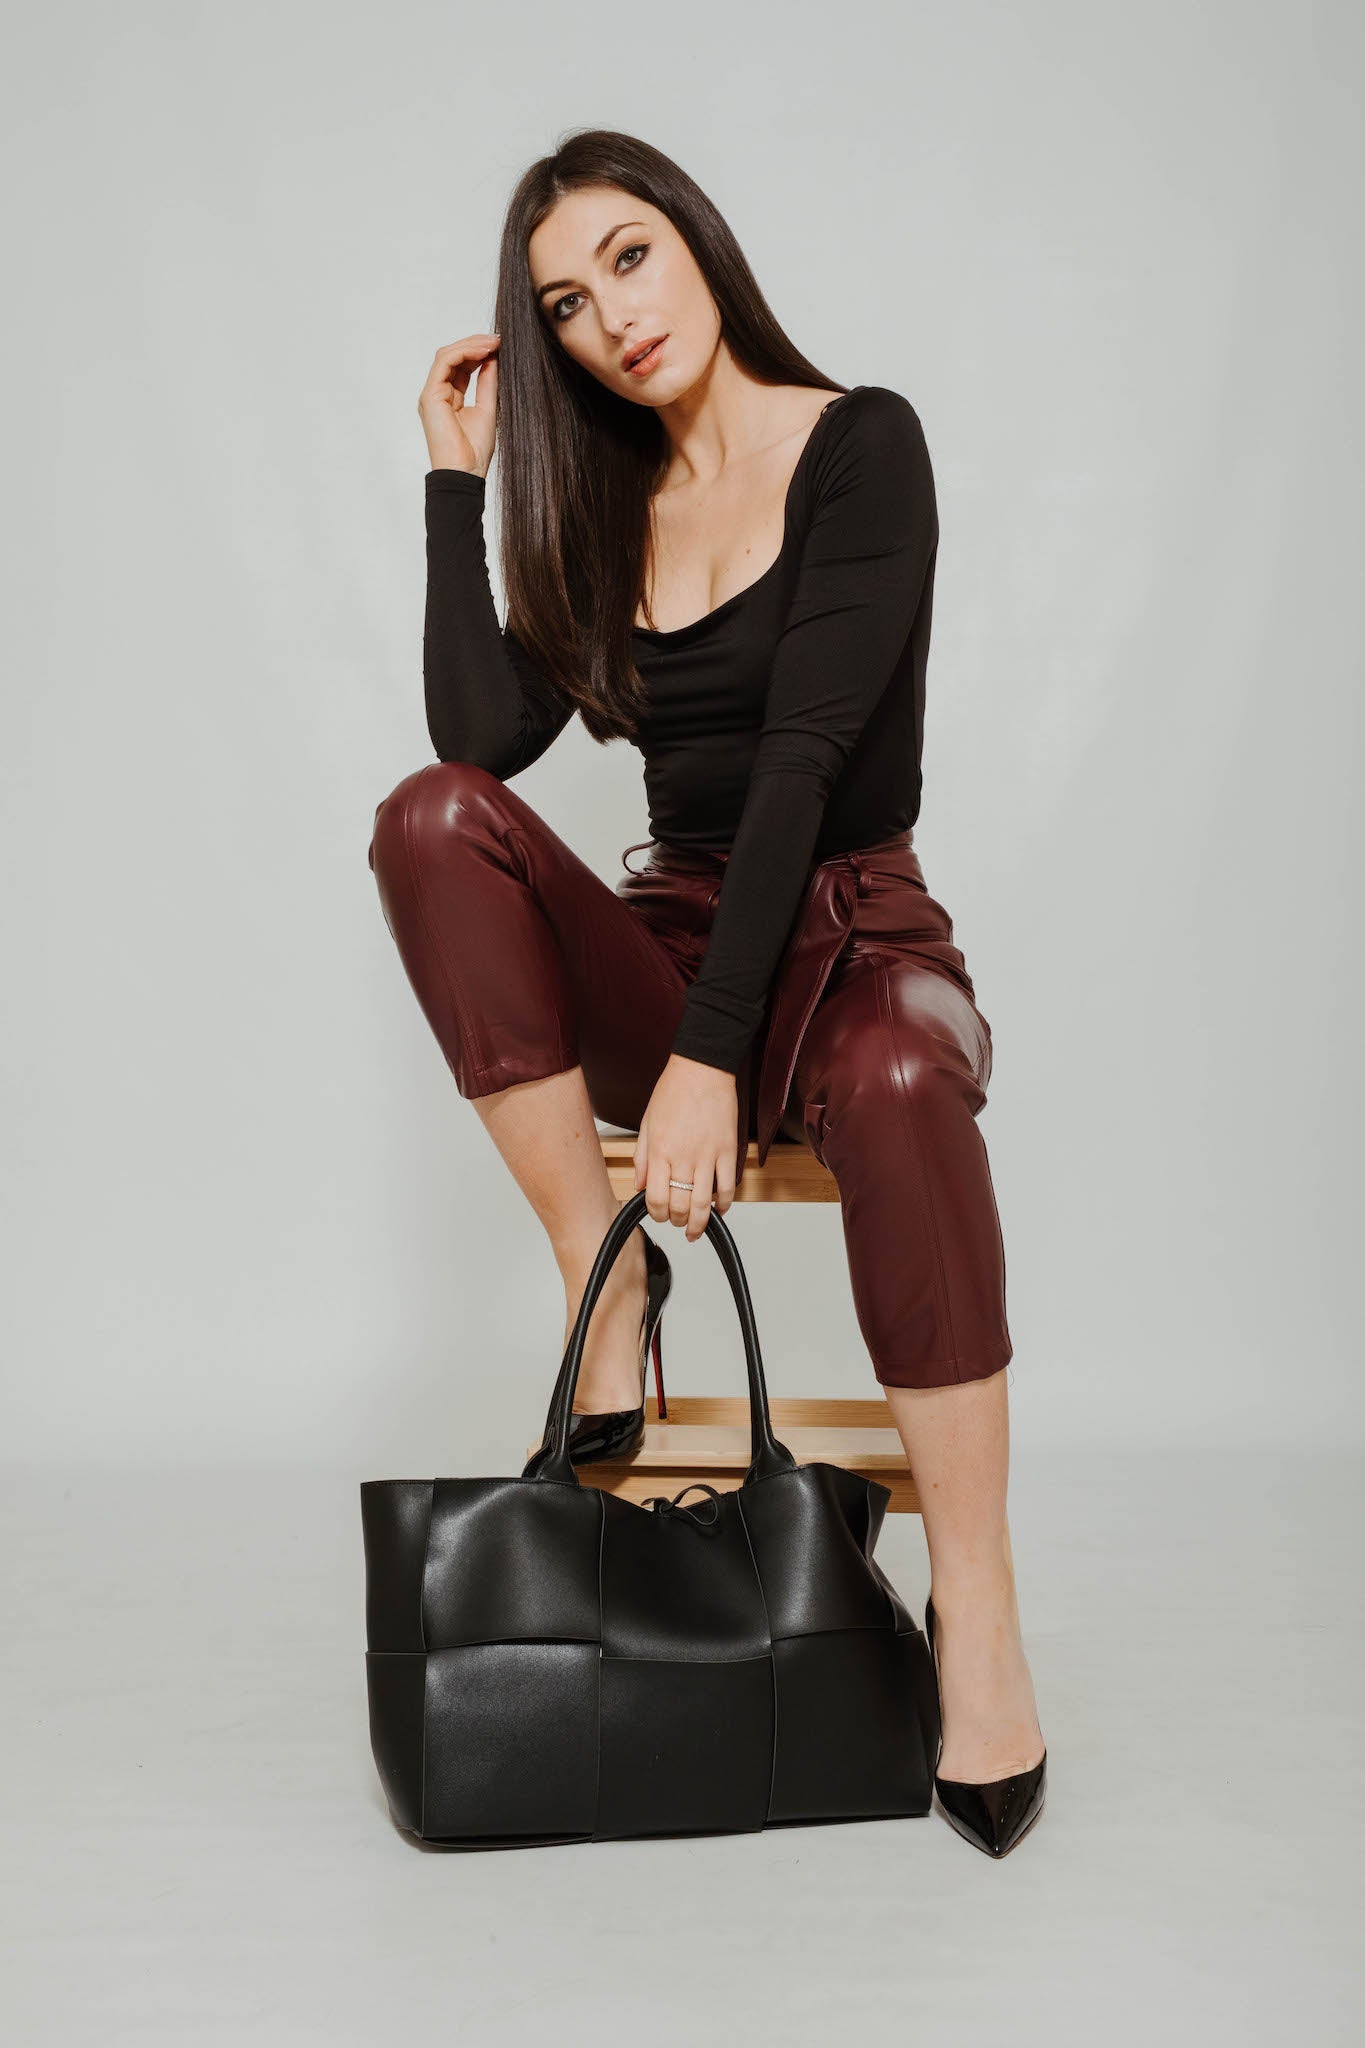 Alana Faux Leather Trousers In Burgundy - The Walk in Wardrobe